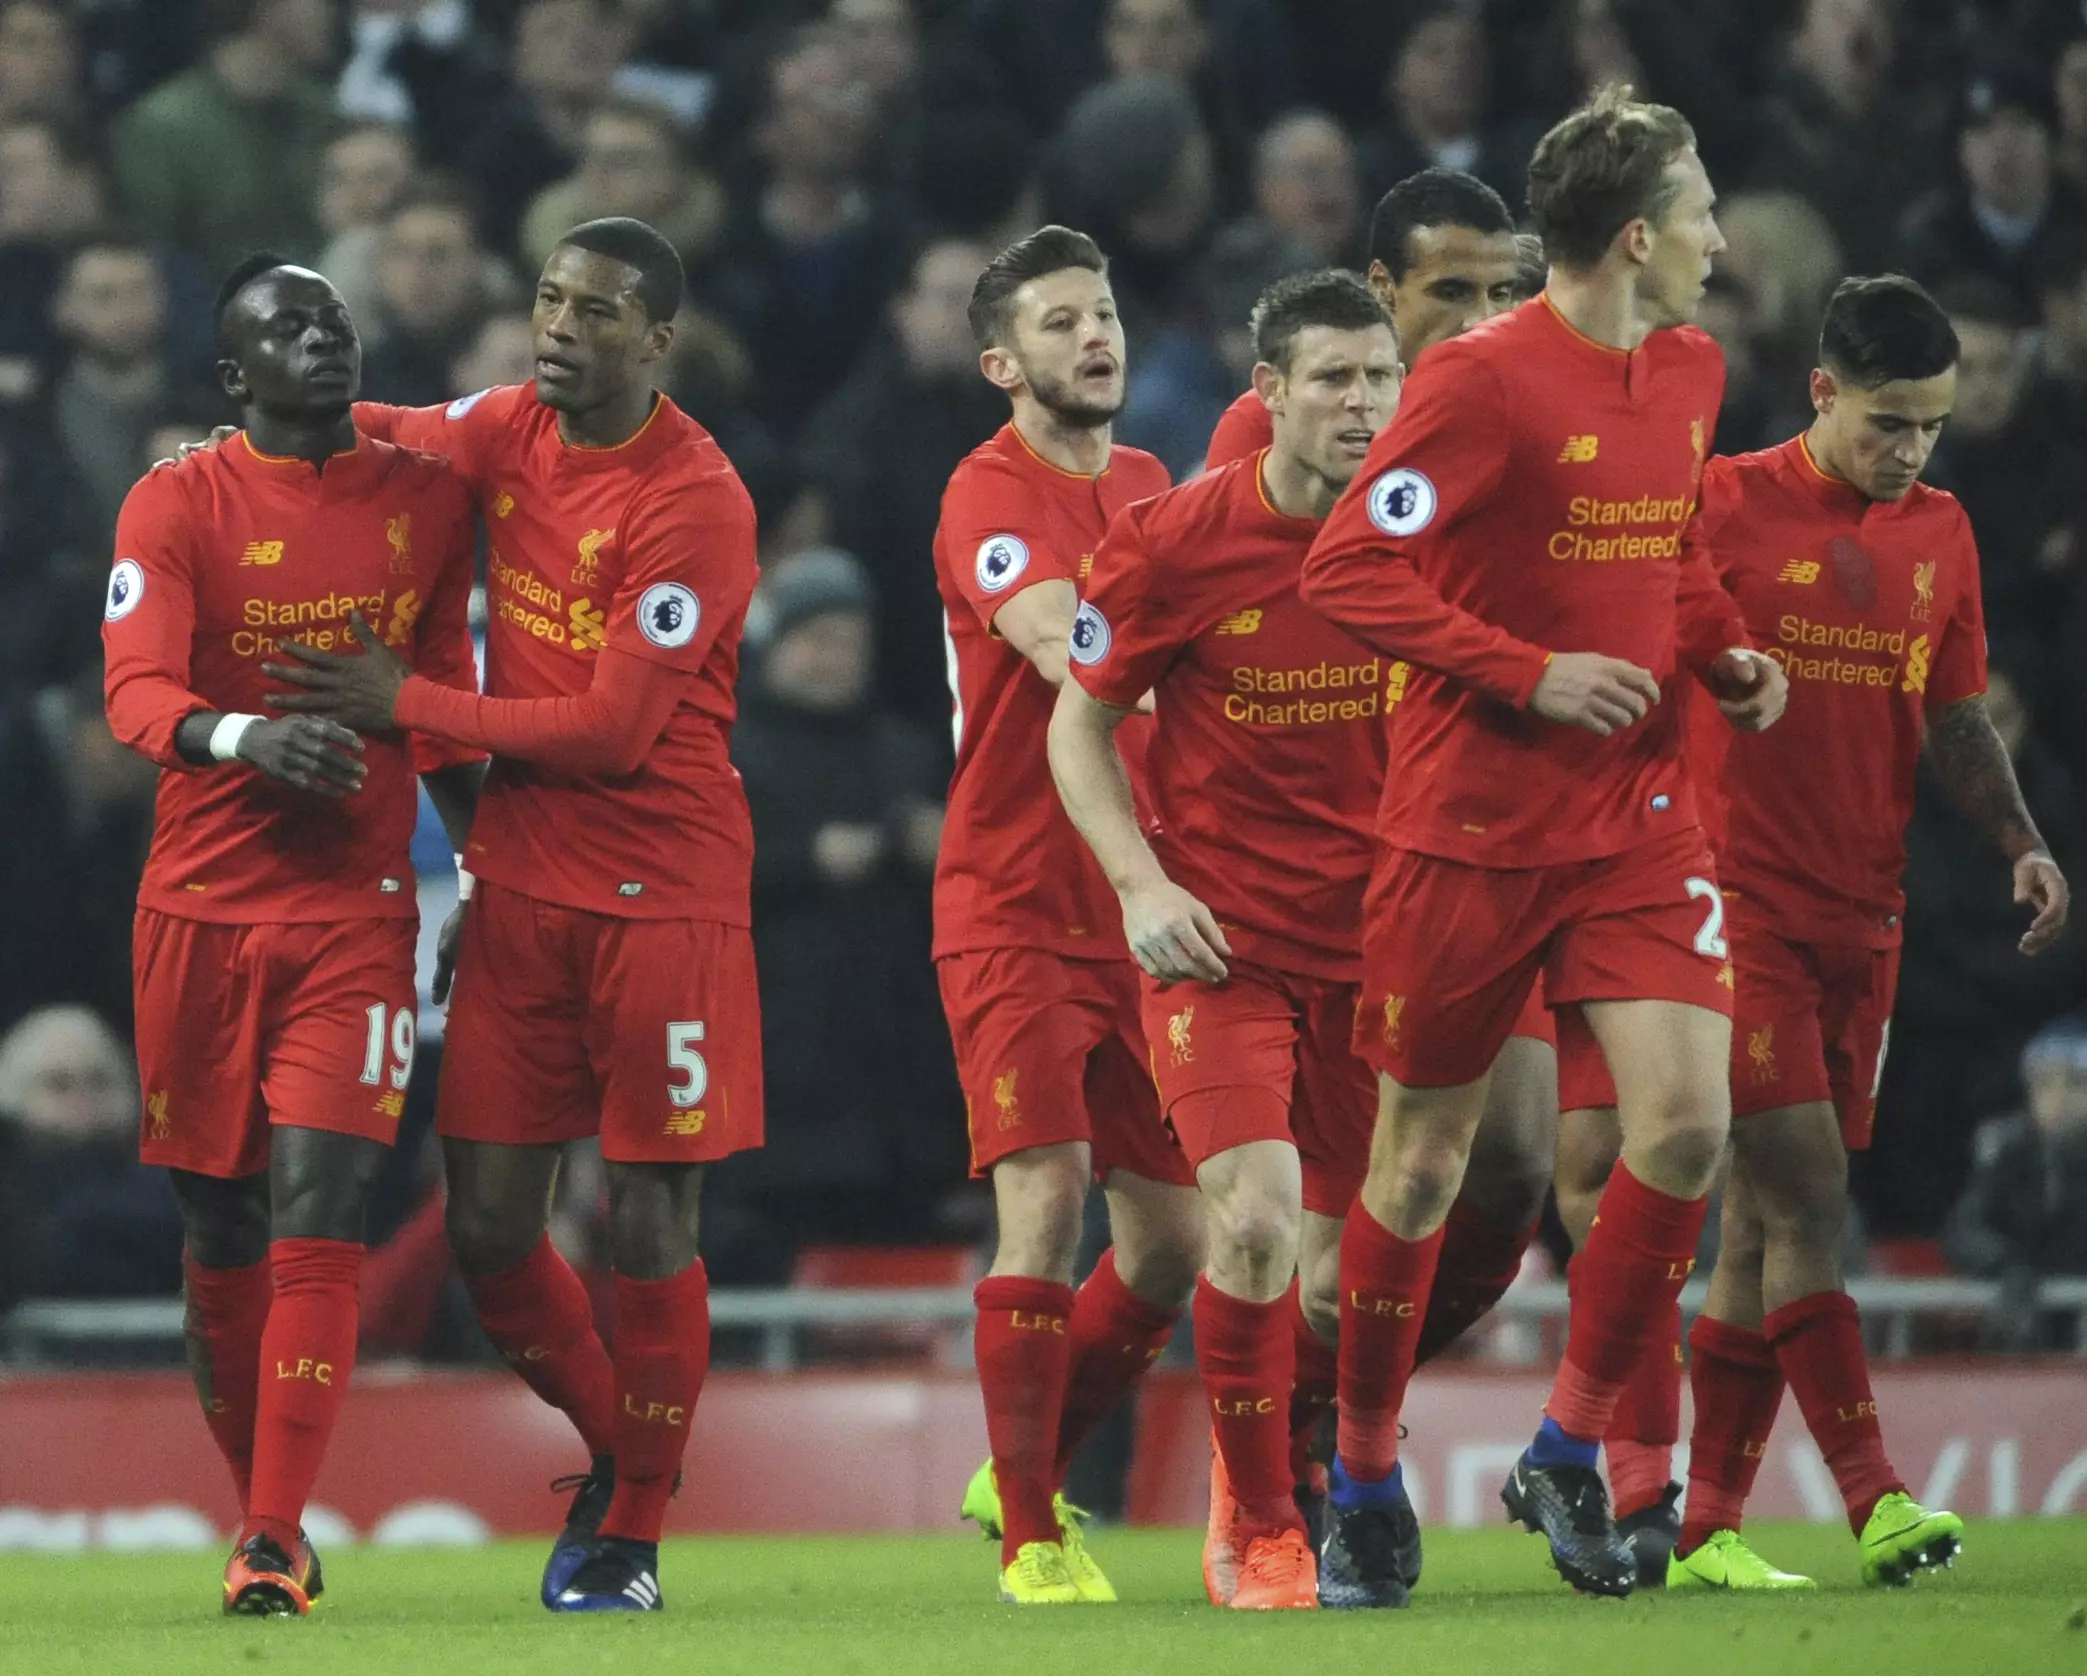 WATCH: You May Have Missed Georginio Wijnaldum's Incredible Celebration For Liverpool Goal